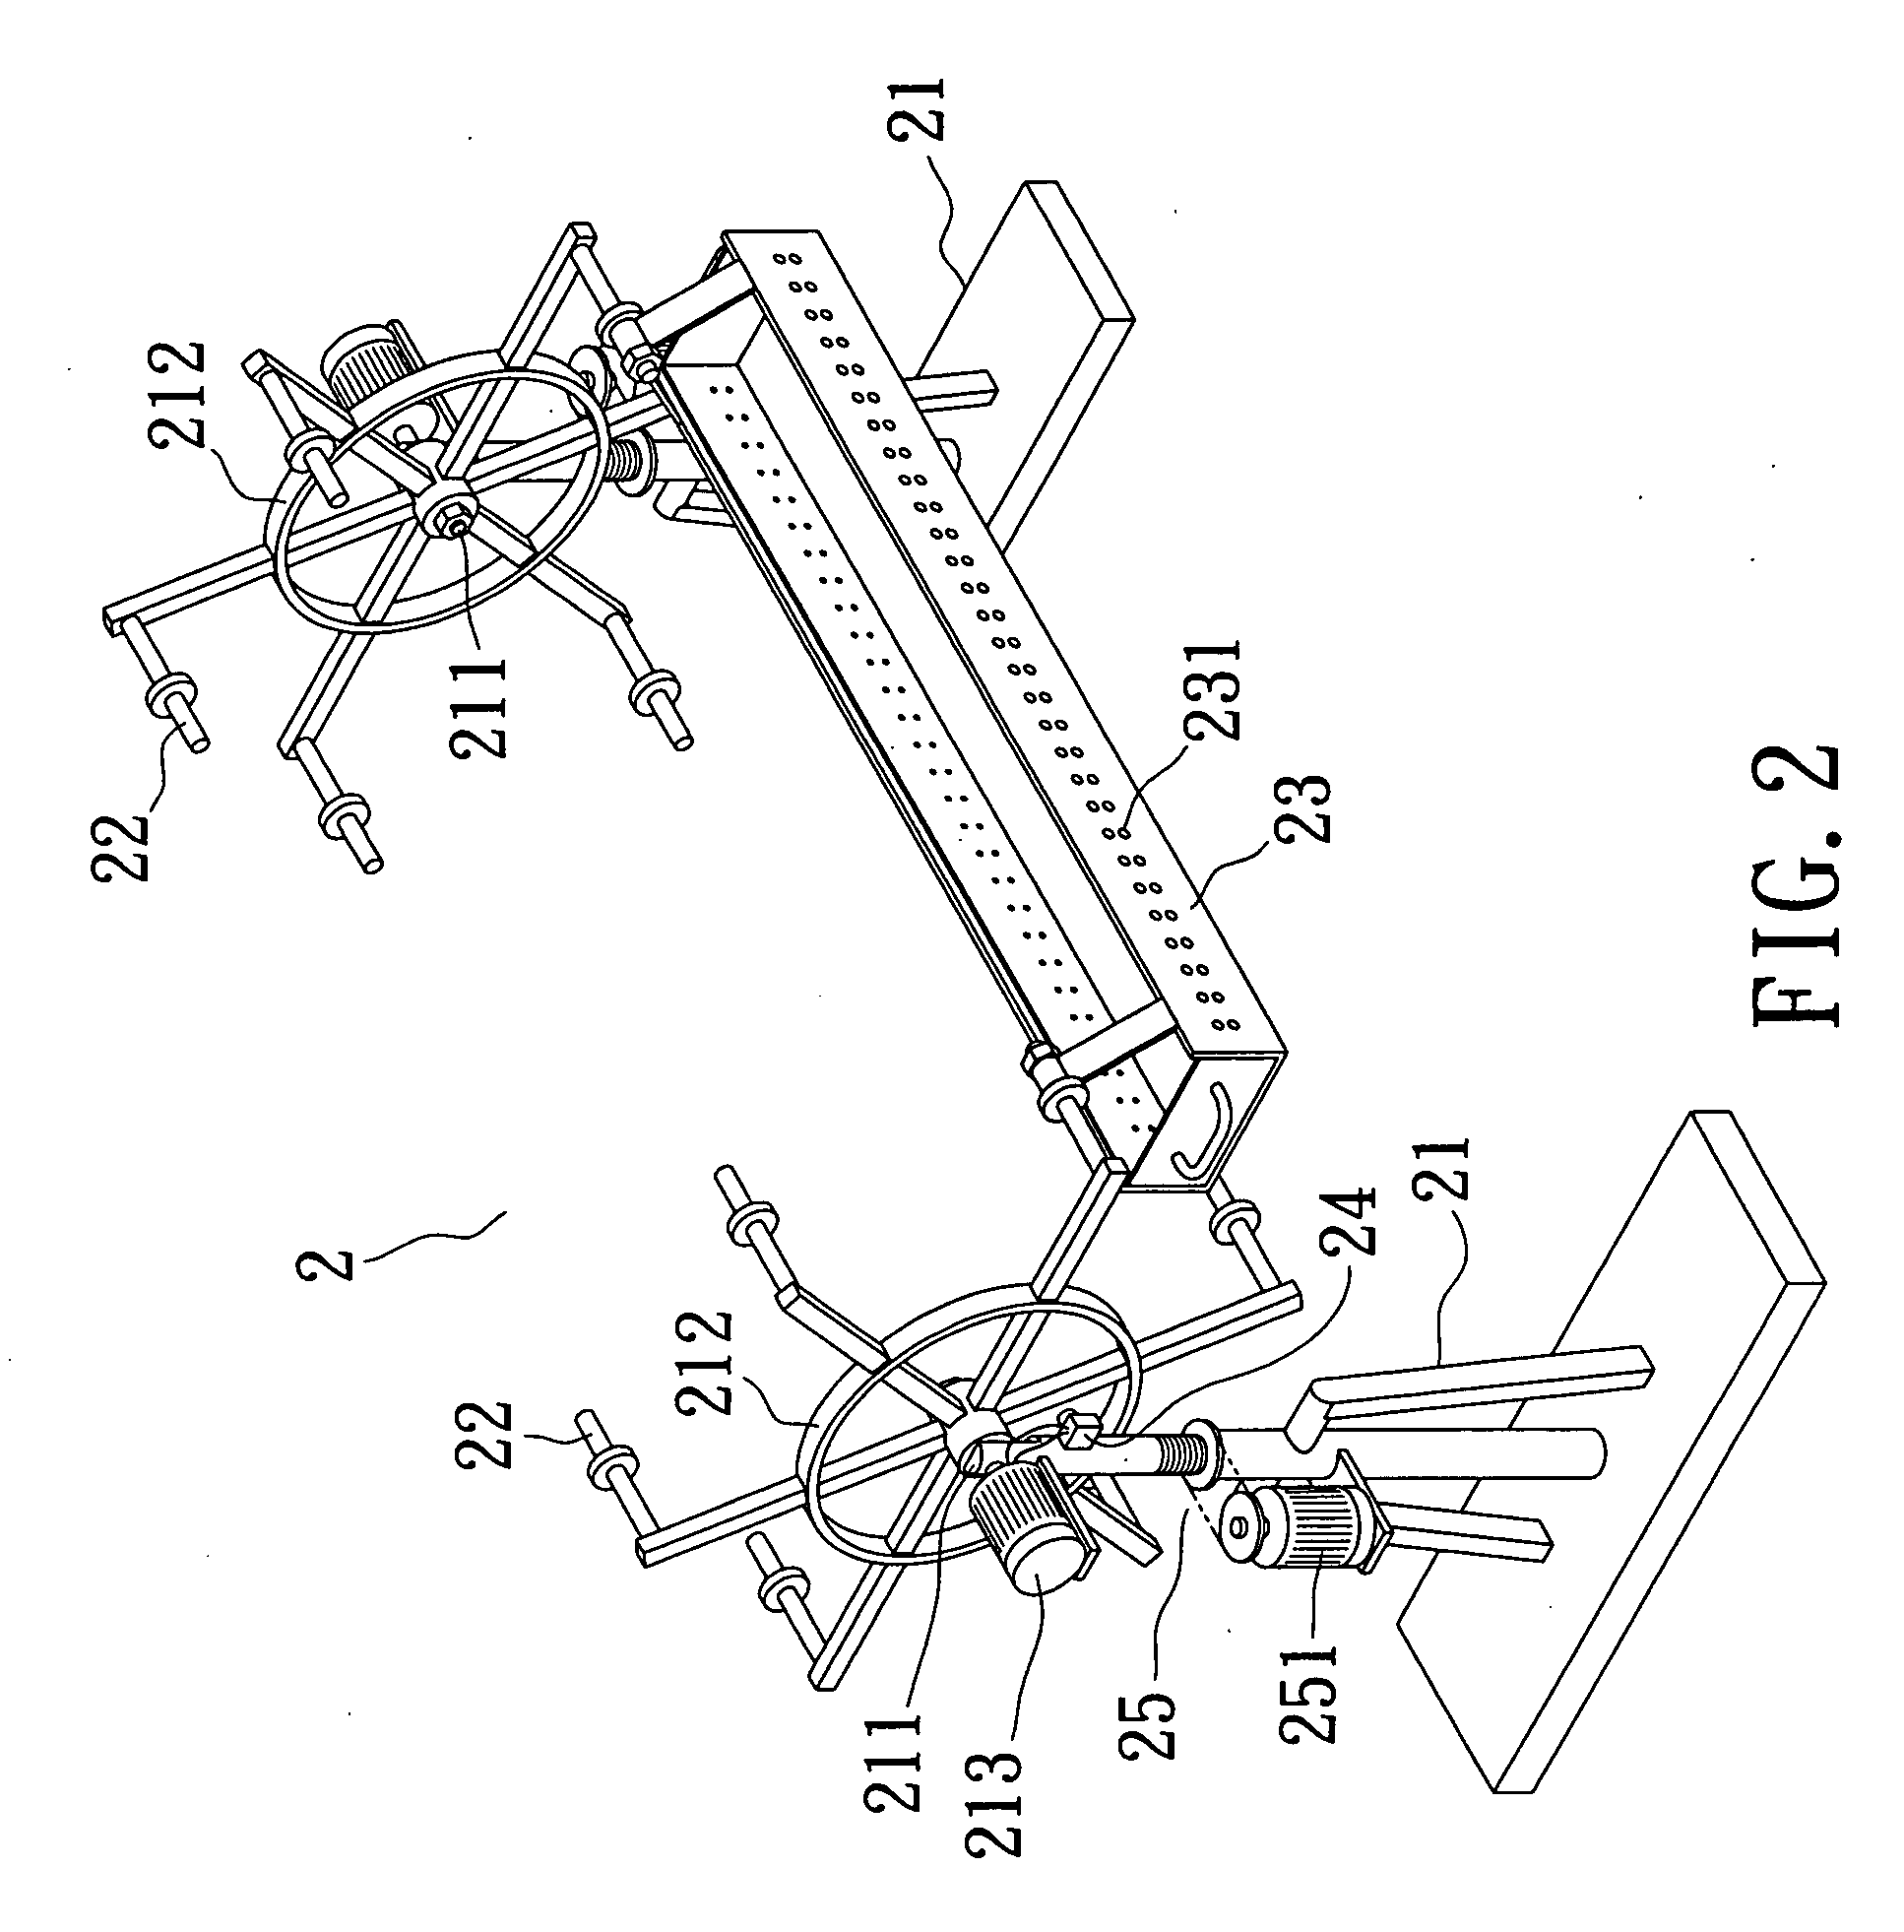 Circulating growing apparatus for breeding and cultivating together